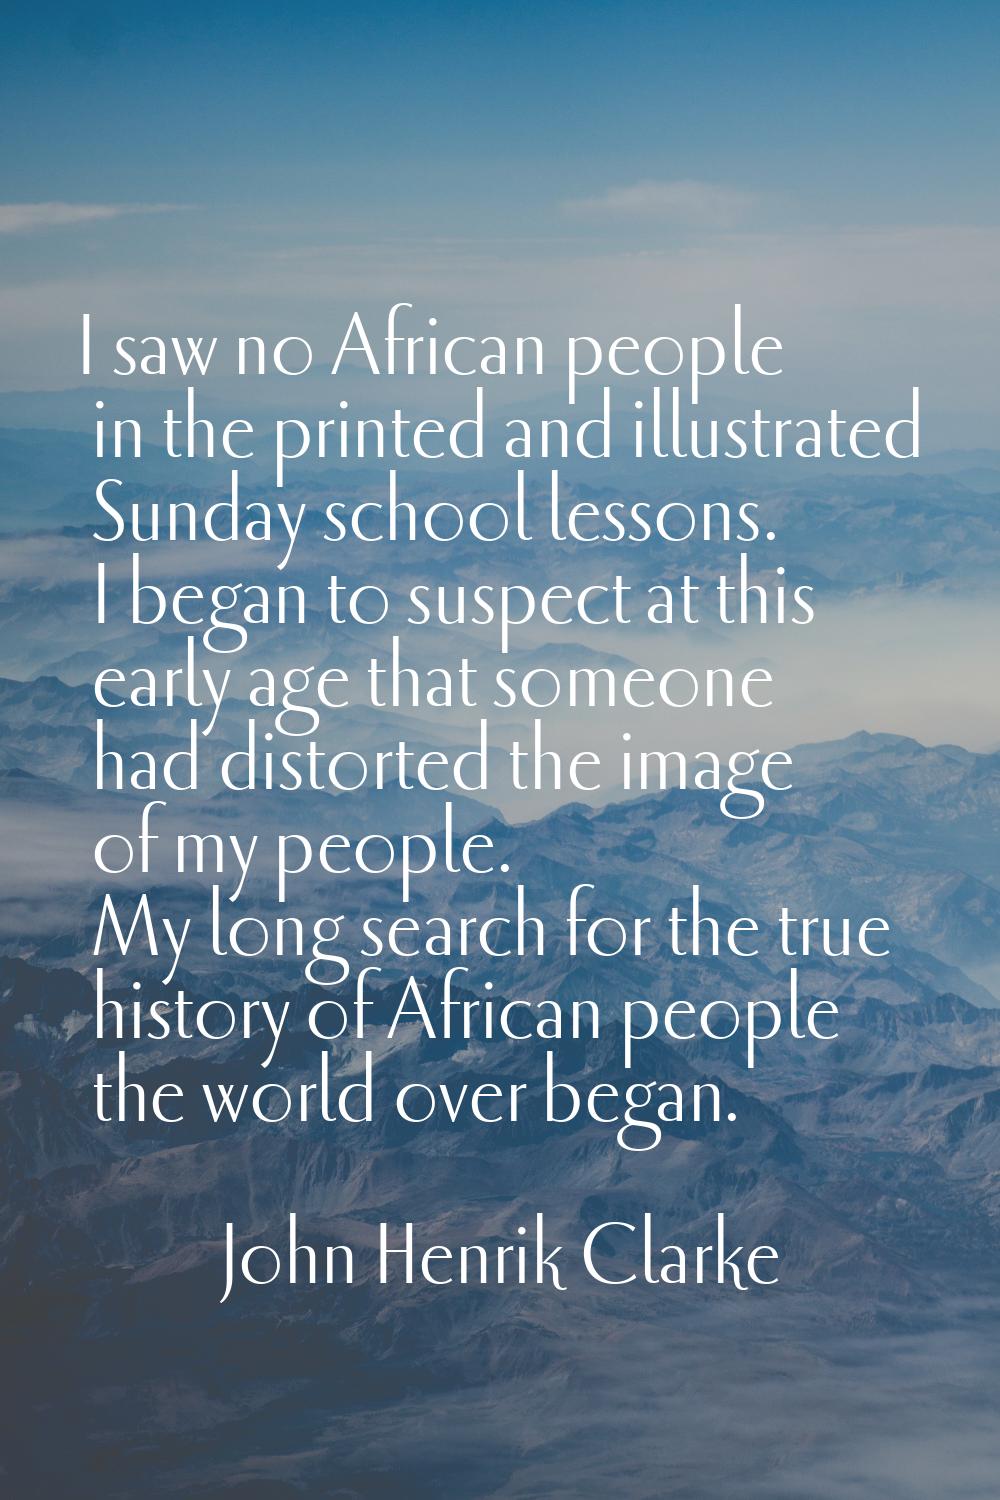 I saw no African people in the printed and illustrated Sunday school lessons. I began to suspect at